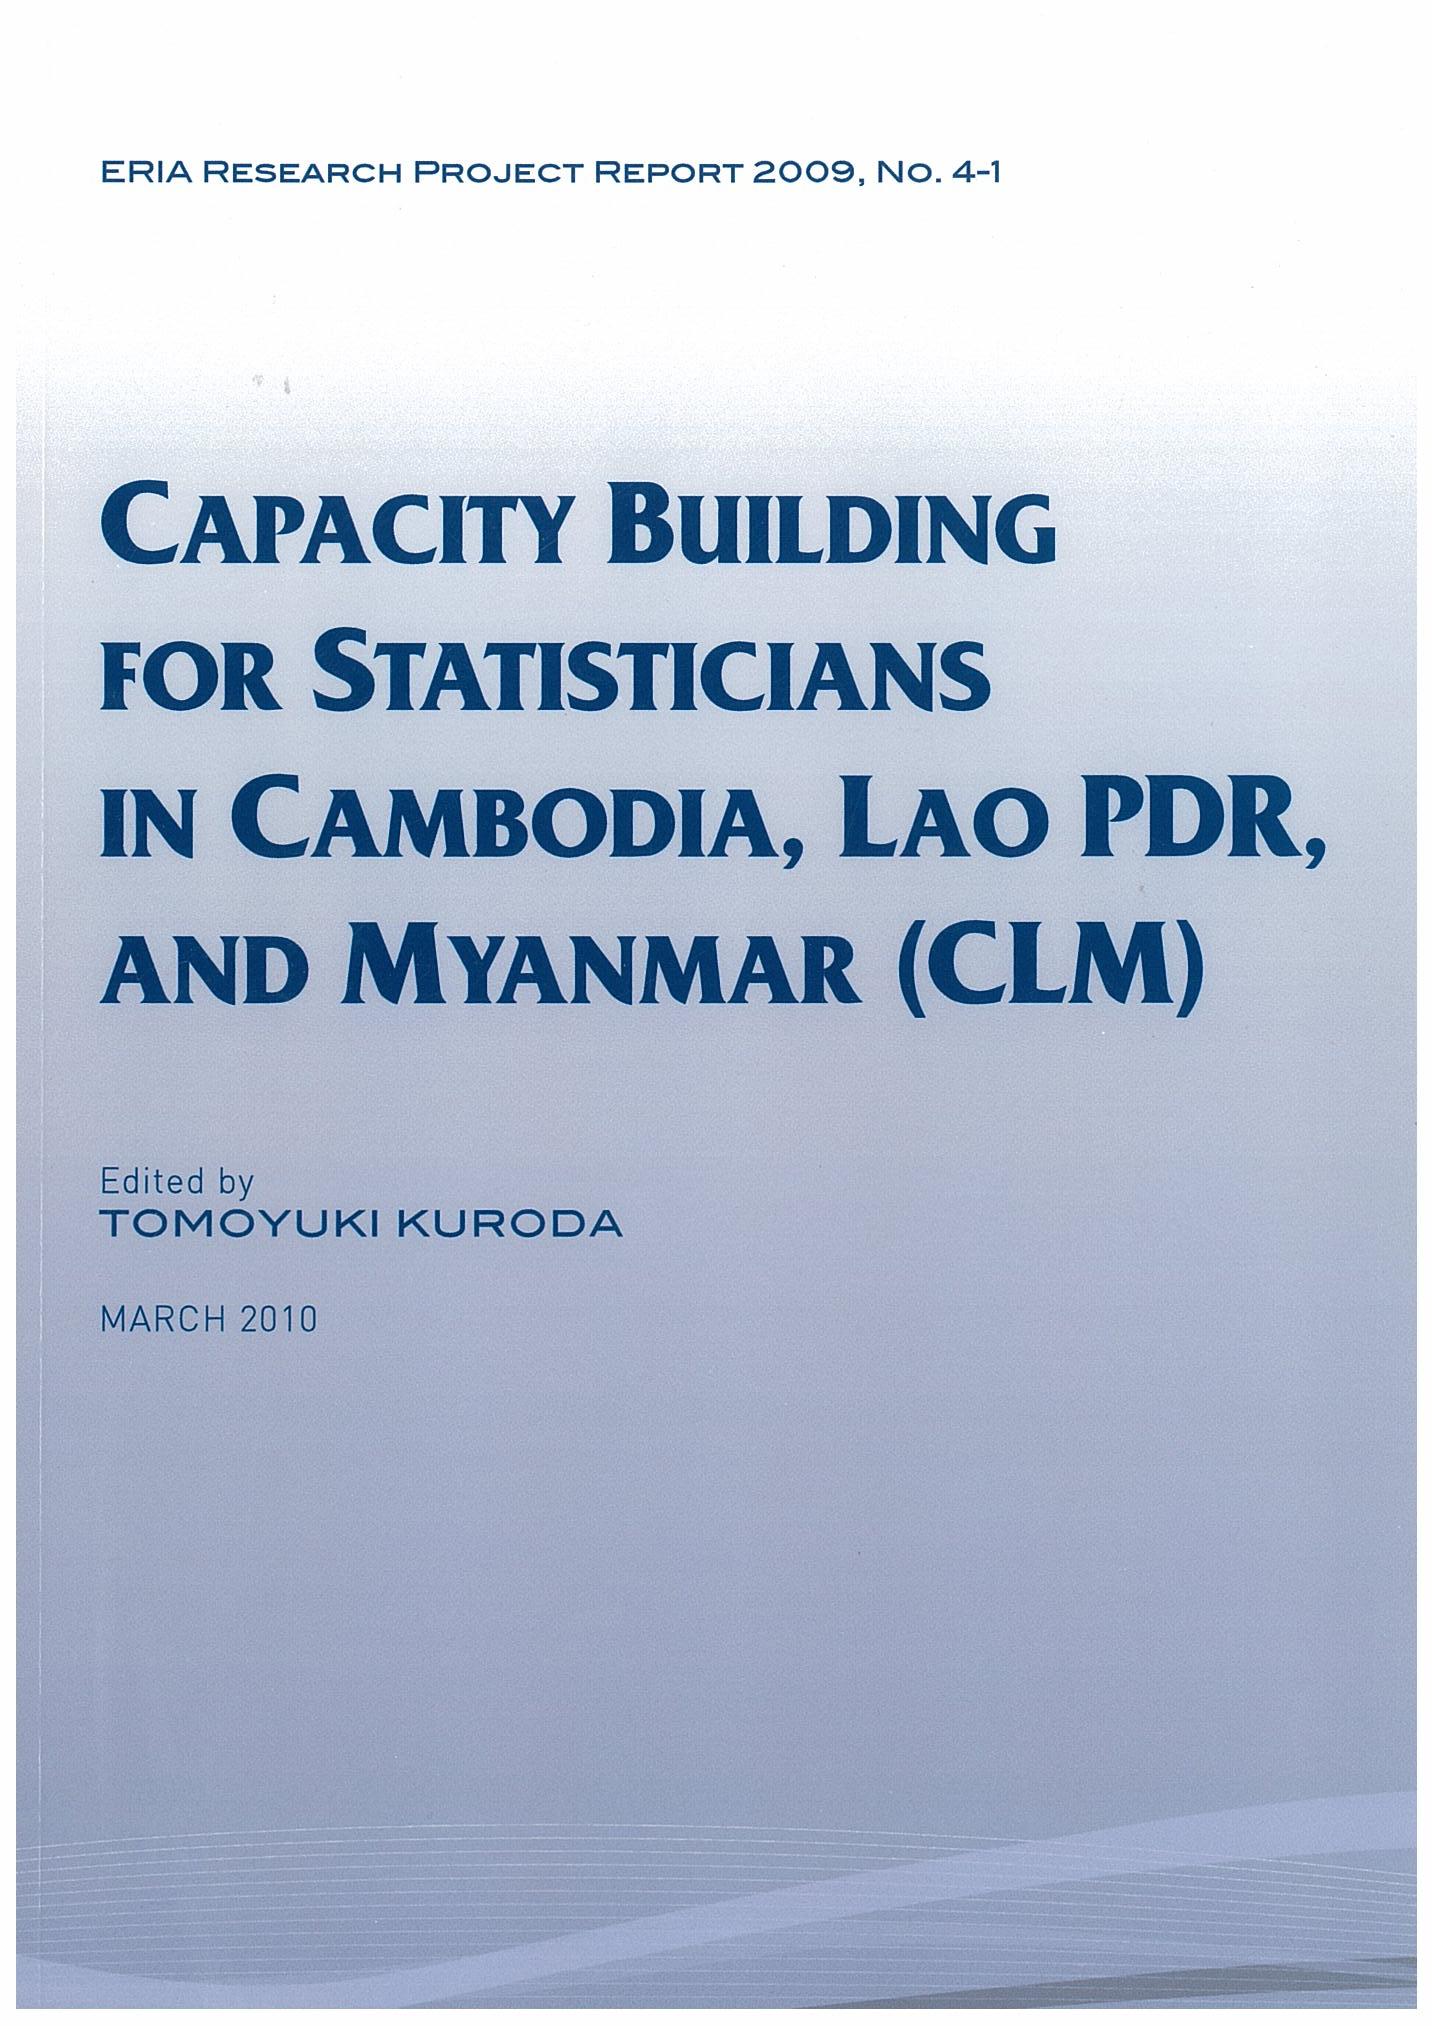 Capacity Building for Statisticians in Cambodia, Lao PDR, and Myanmar (CLM)